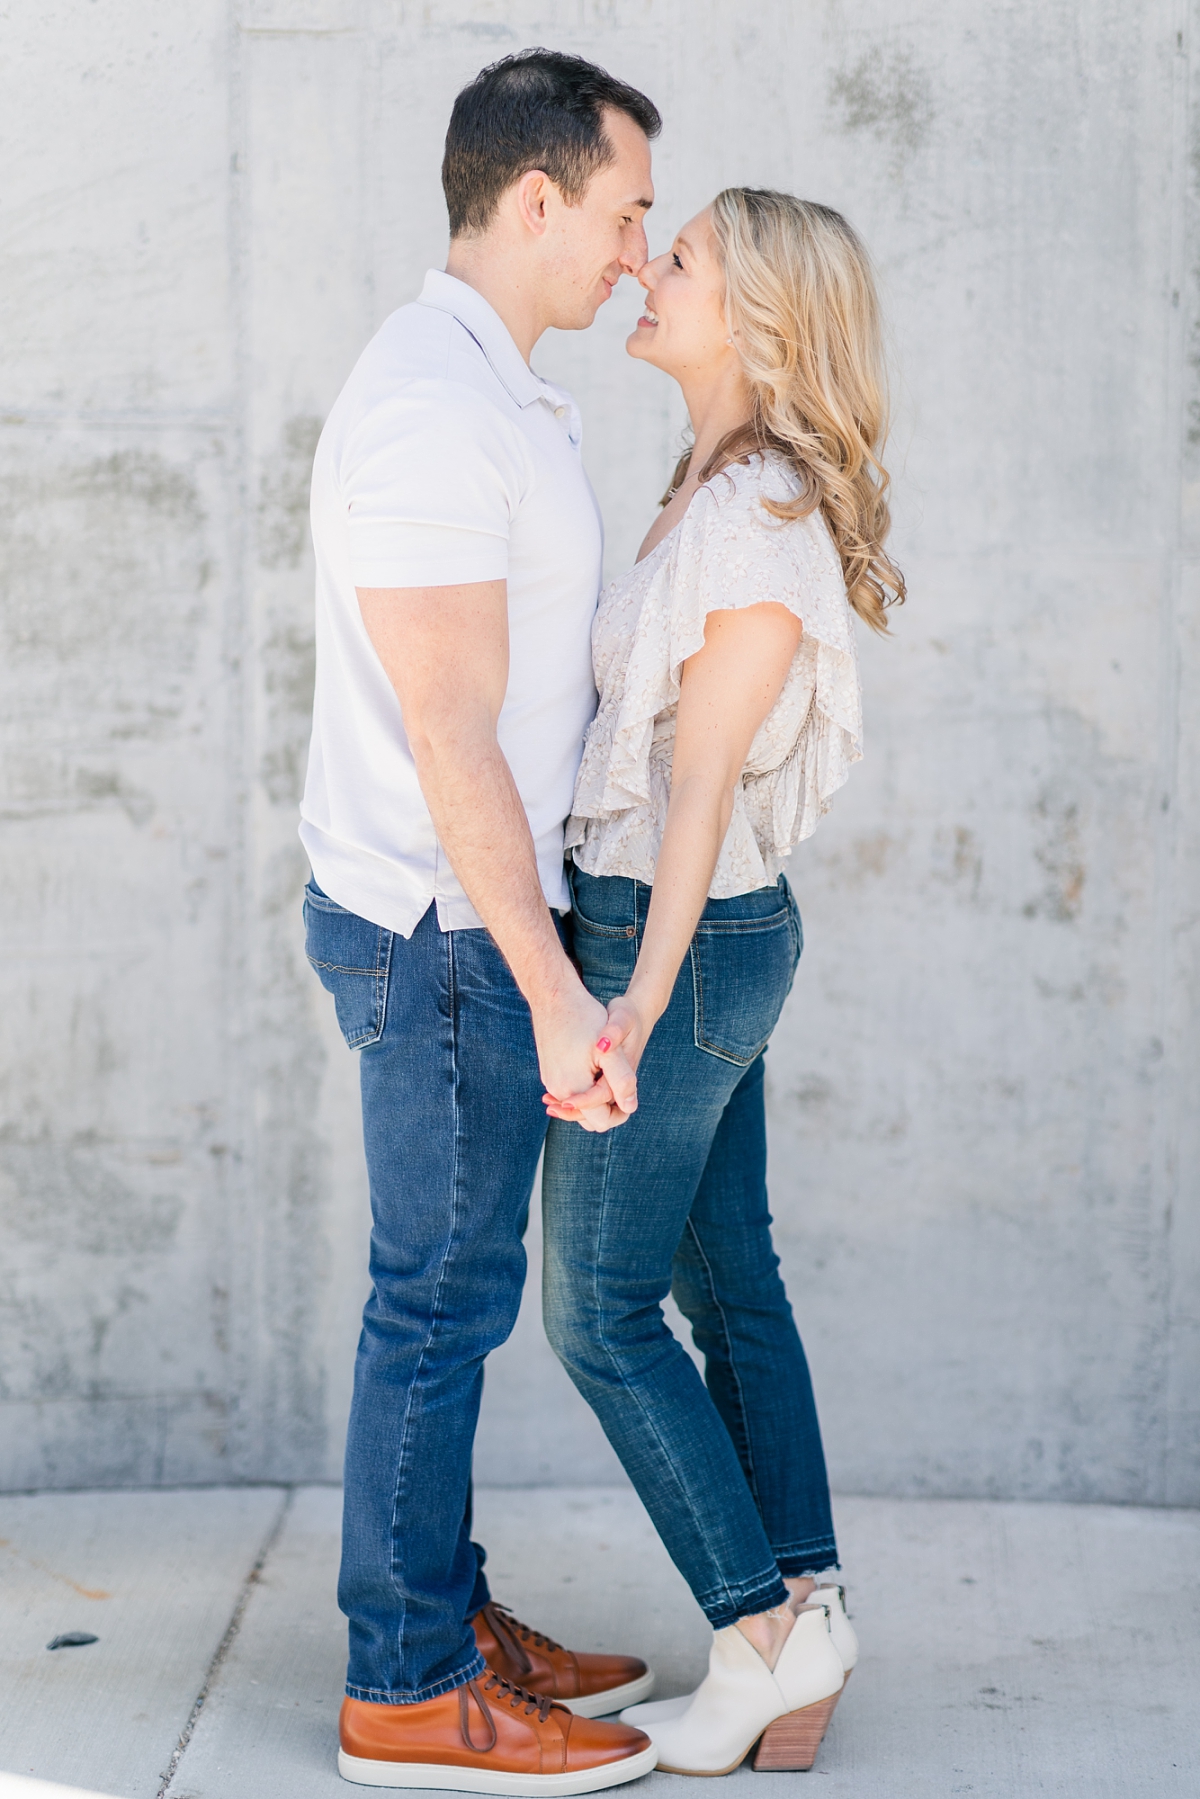 downtown lancaster engagement photography photo 467.JPG